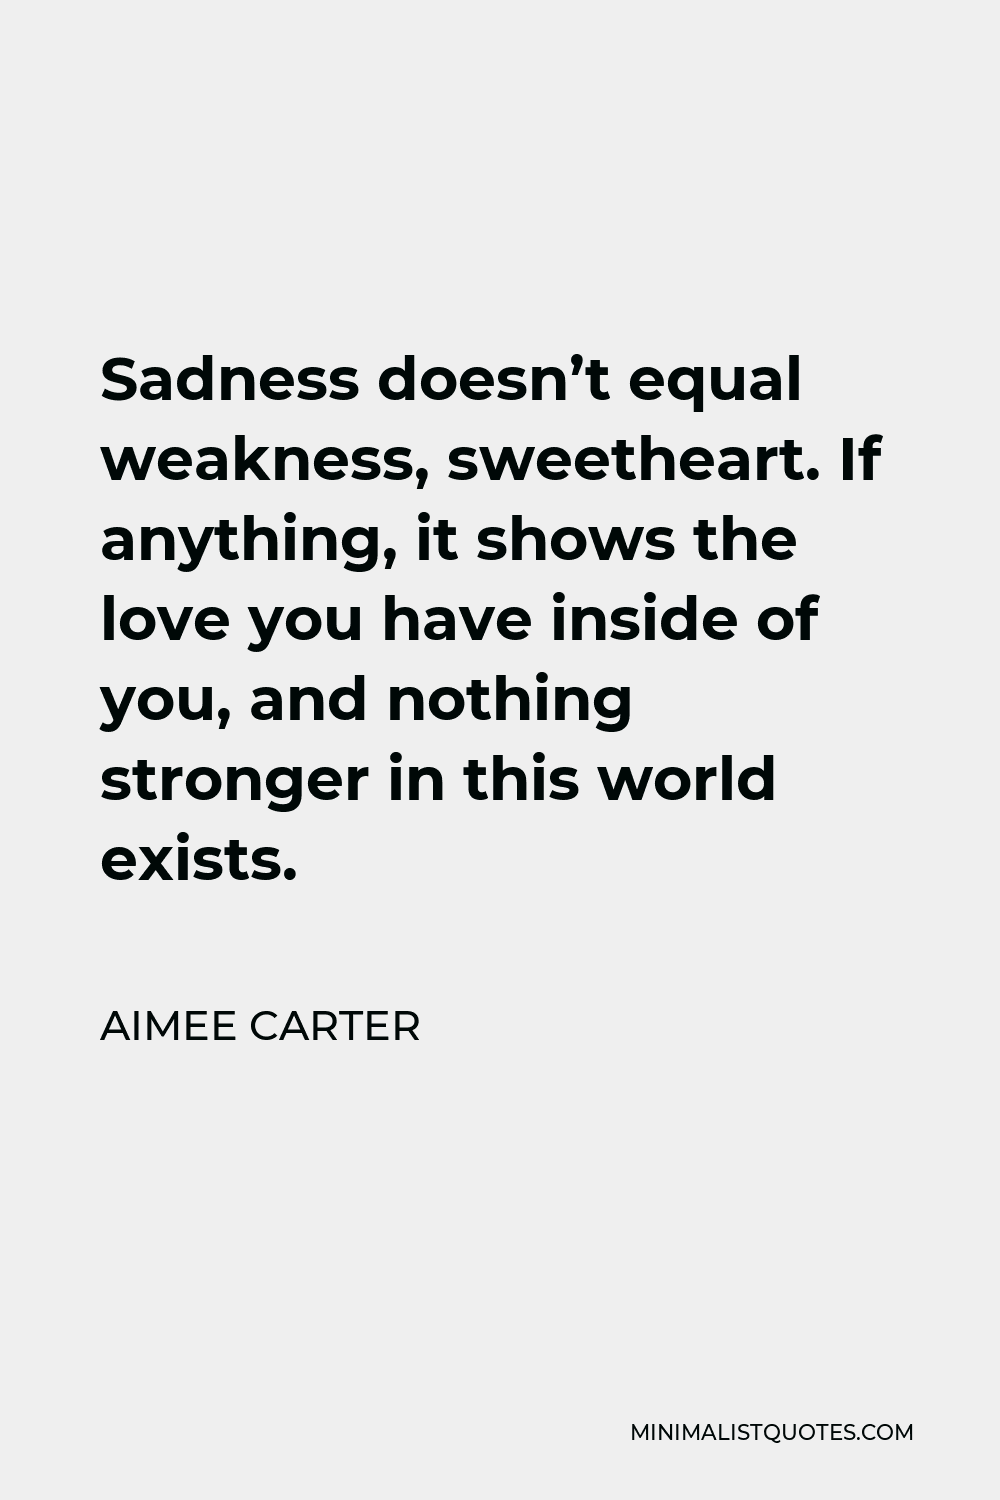 Aimee Carter Quote - Sadness doesn’t equal weakness, sweetheart. If anything, it shows the love you have inside of you, and nothing stronger in this world exists.